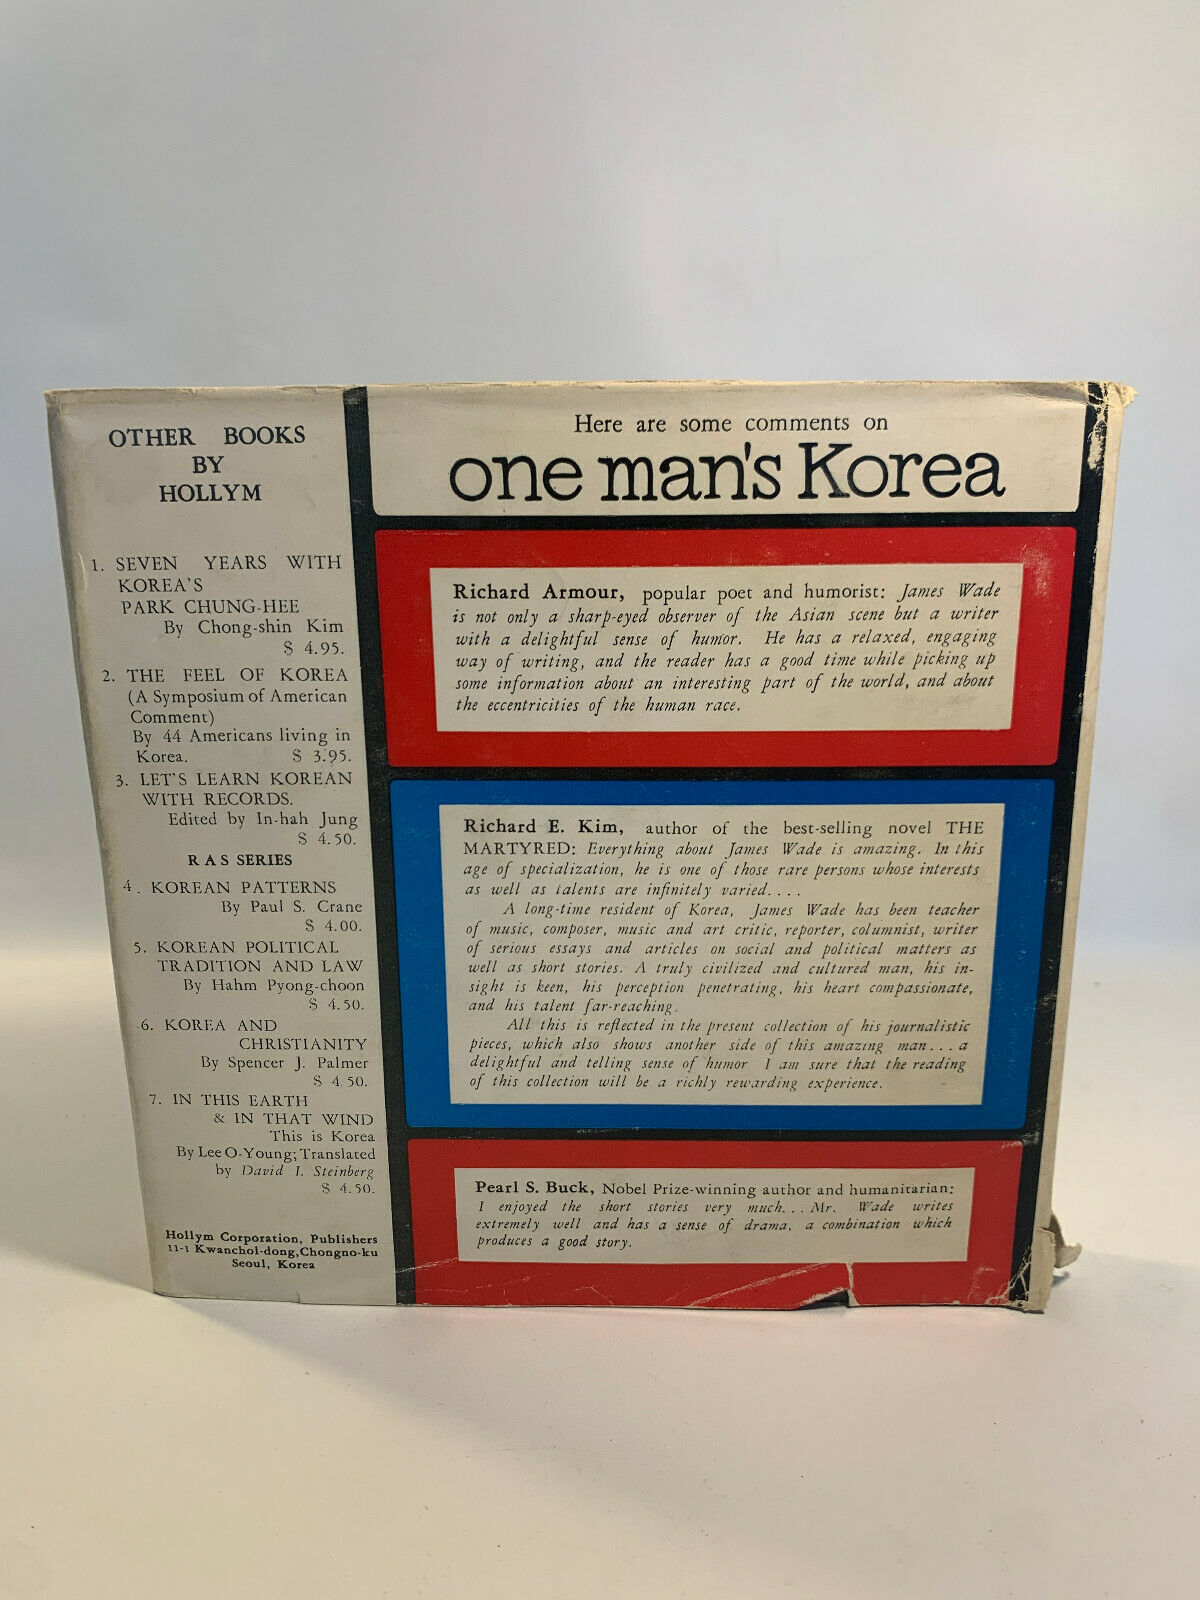 One Man's Korea by James Wade